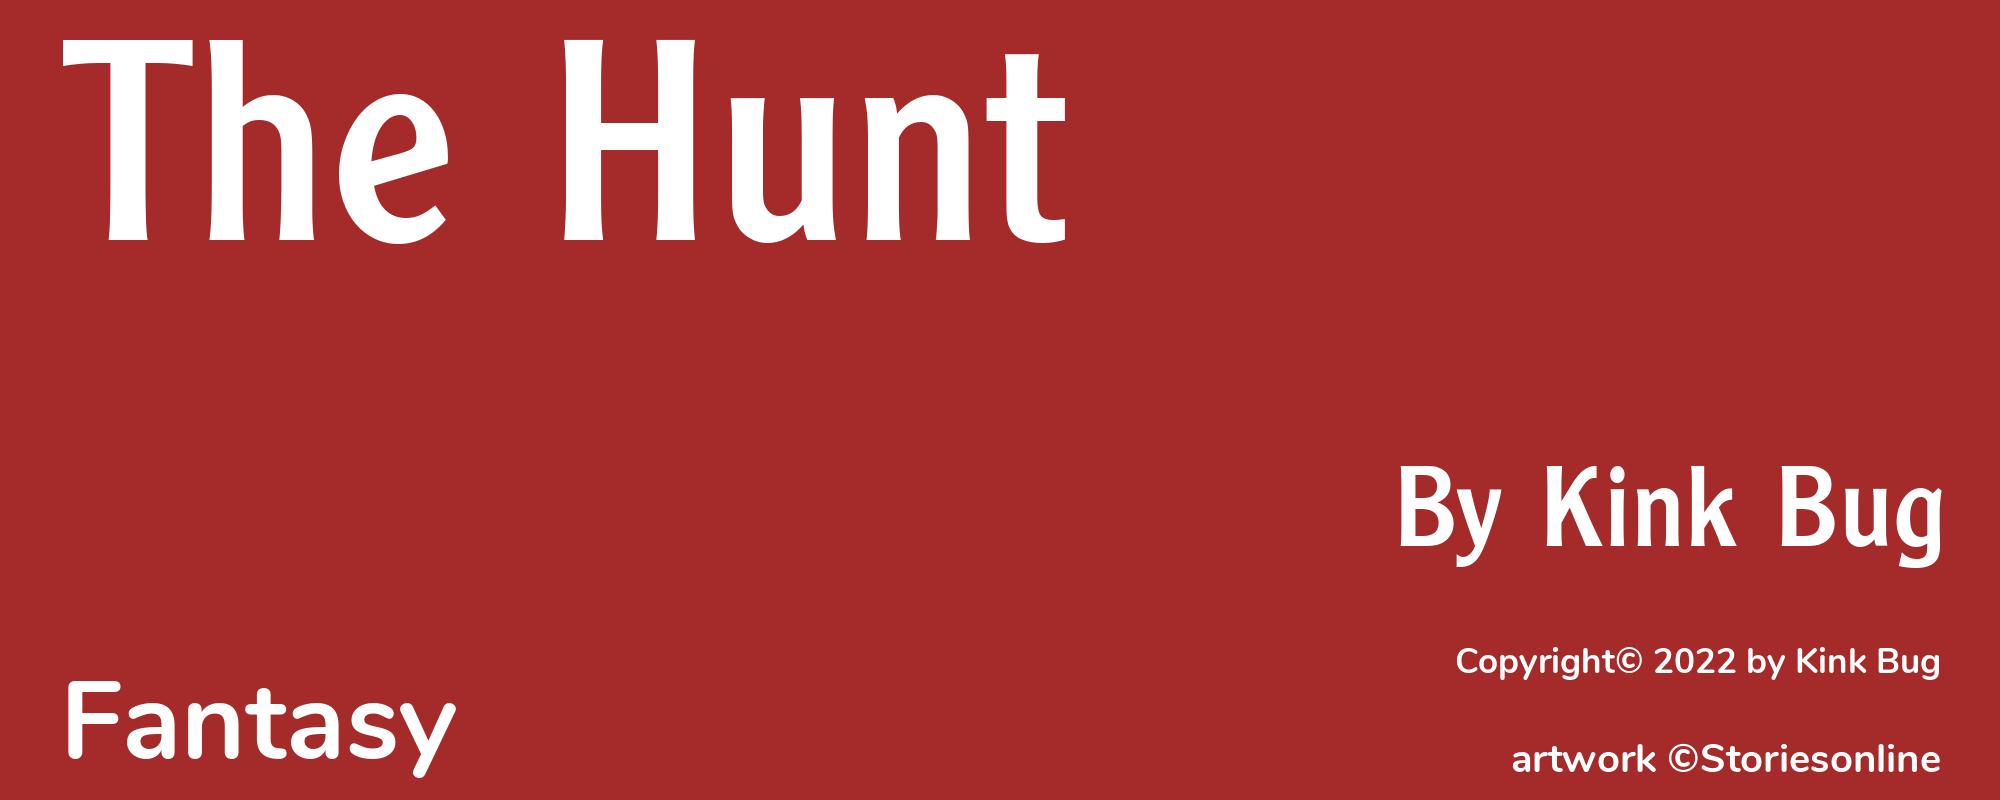 The Hunt - Cover